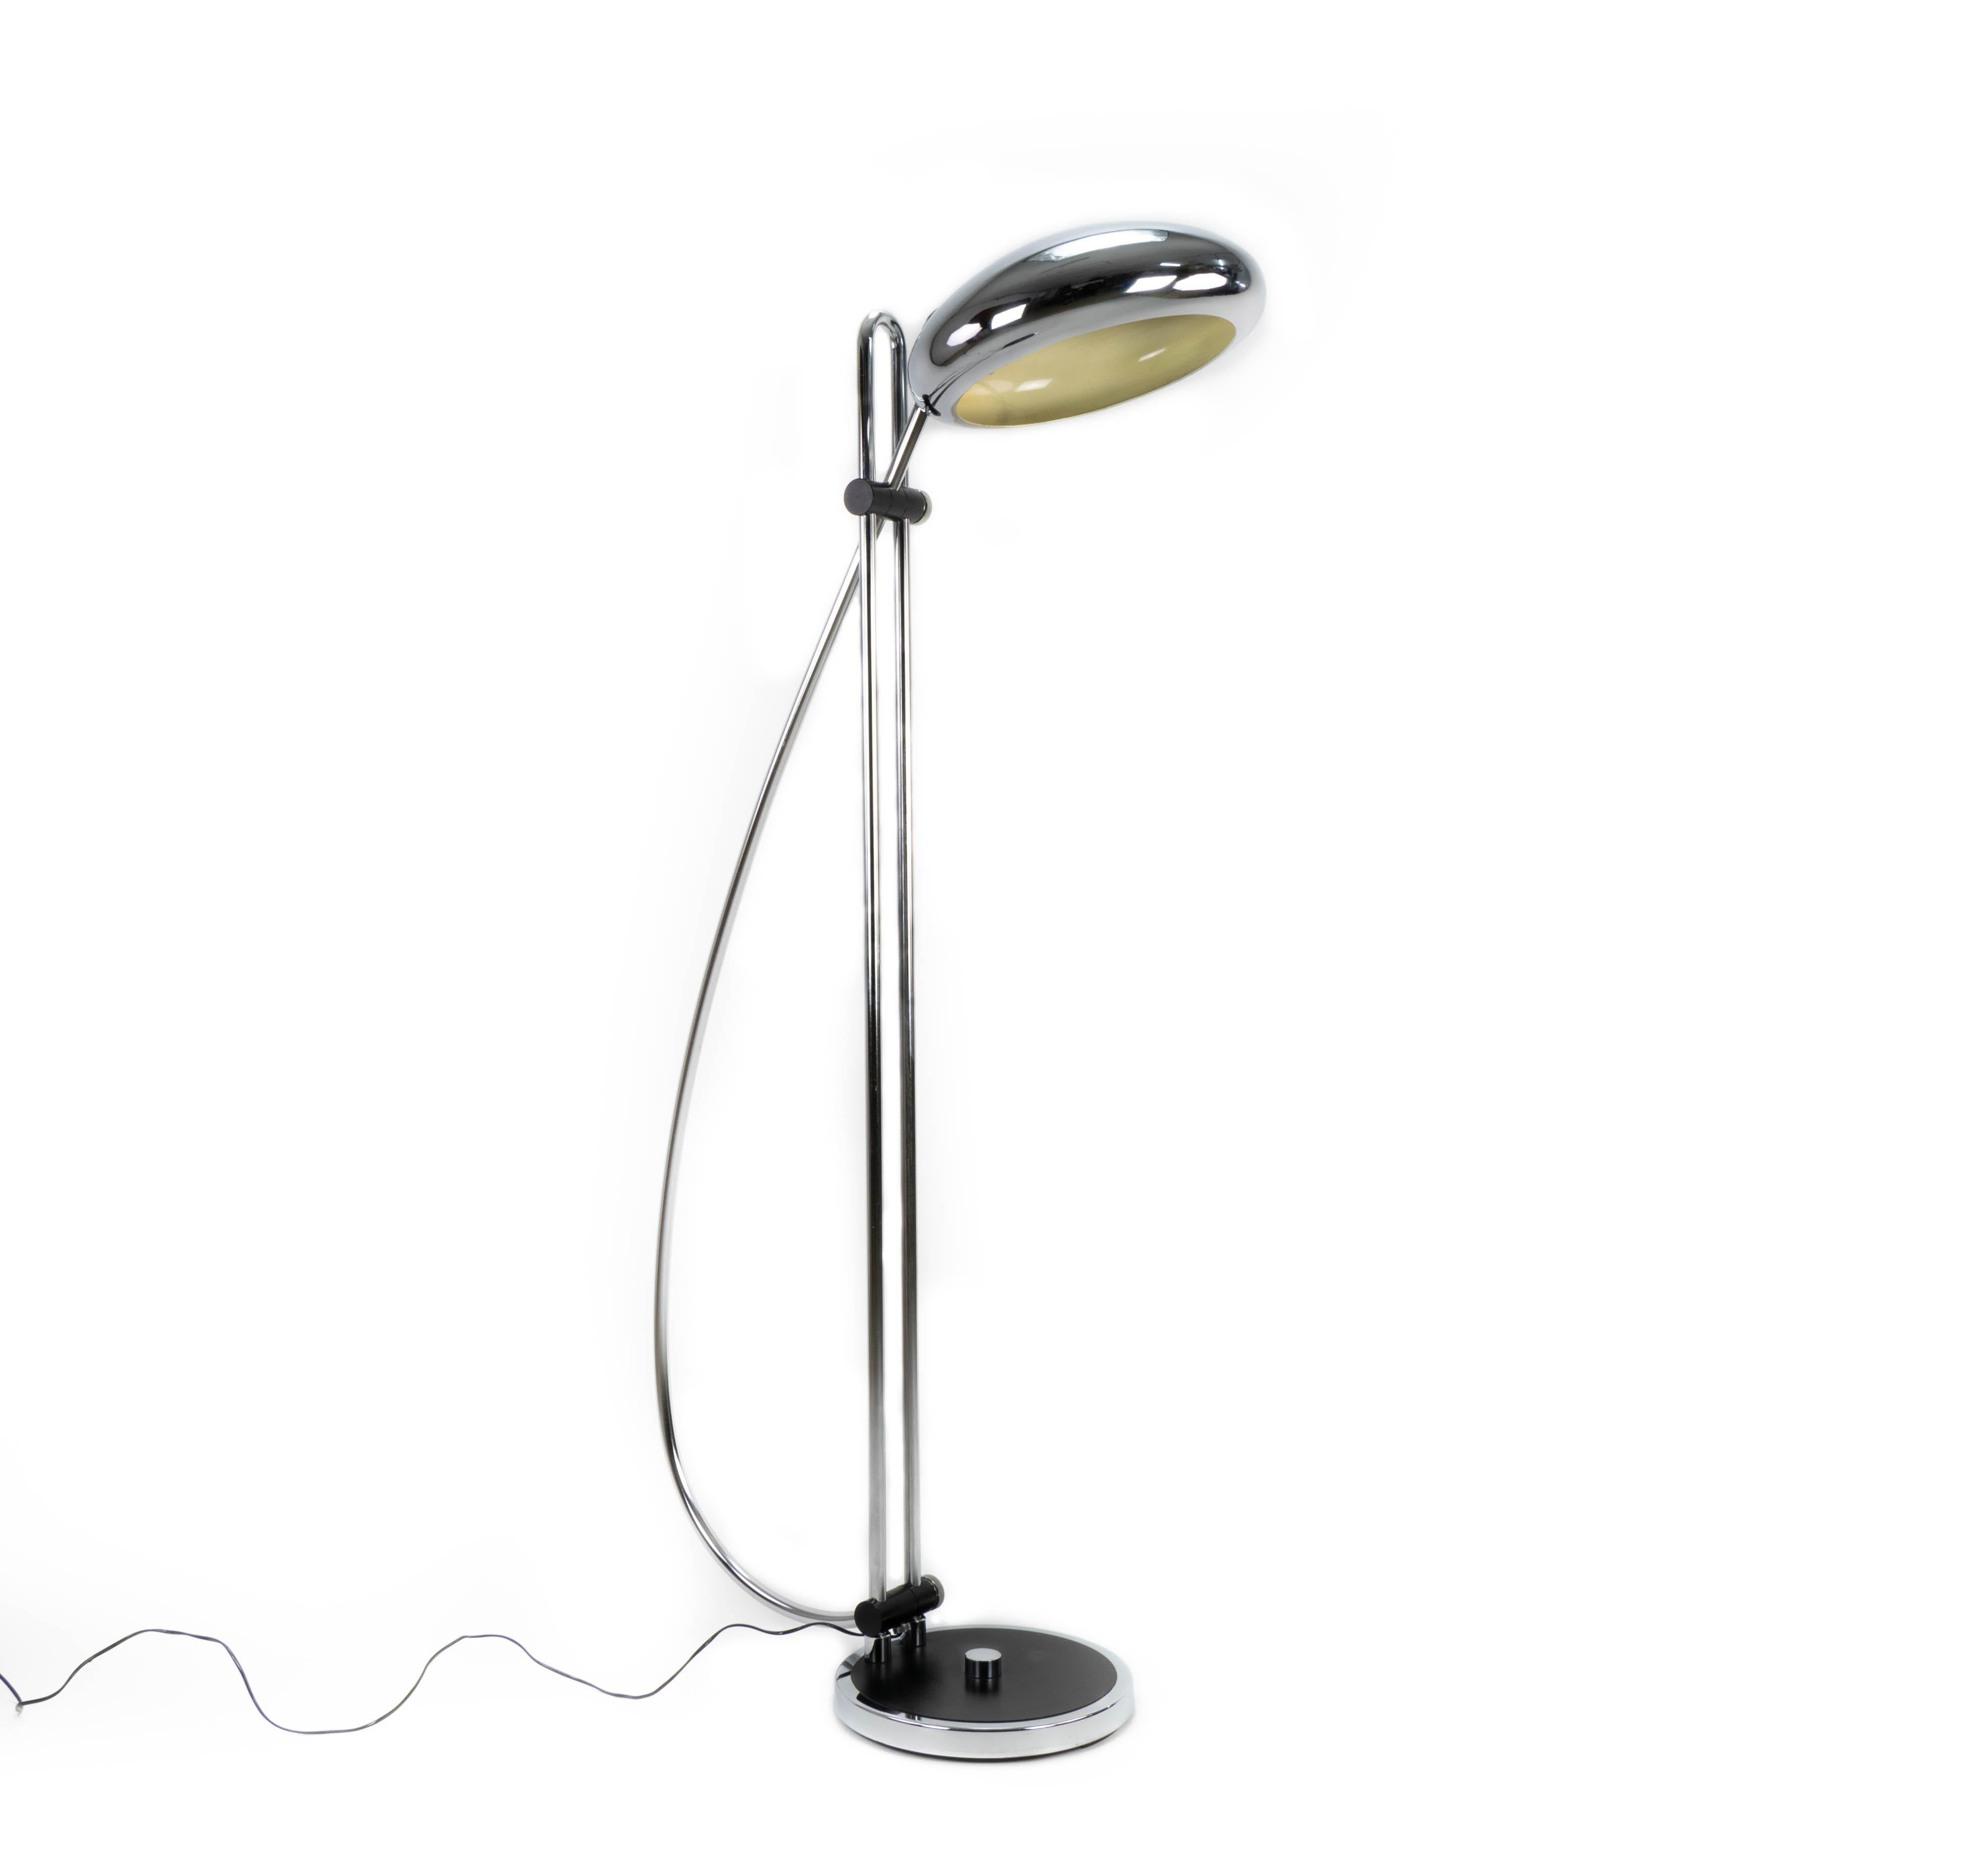 Floor lamp large size of the signature T-Pons. Adjustable both in height and in different positions. Tulip system with kneecap. Made of chromed steel.
Reaches a maximum height of 240 cm.
Minimum height 165 cm.
Diameter of the base 35